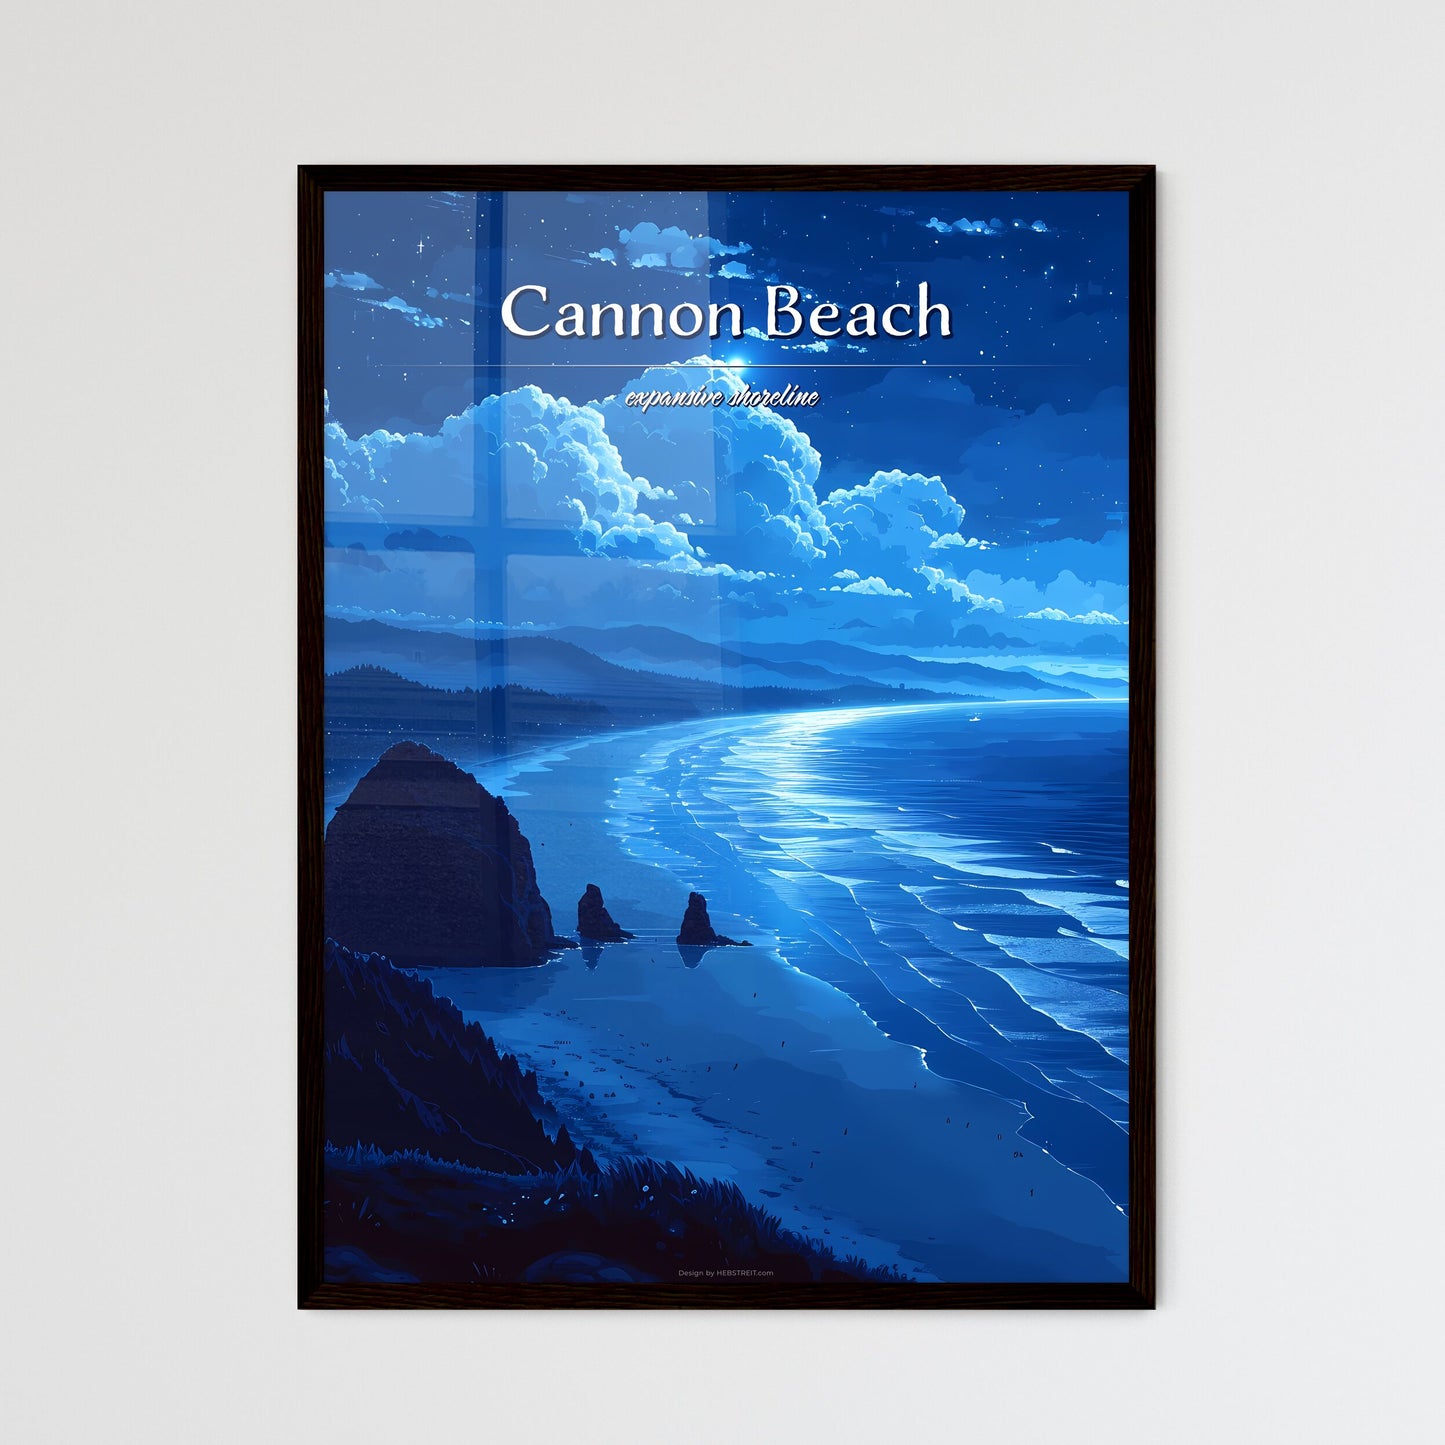 Cannon Beach - Art print of a beach with rocks and water at night Default Title